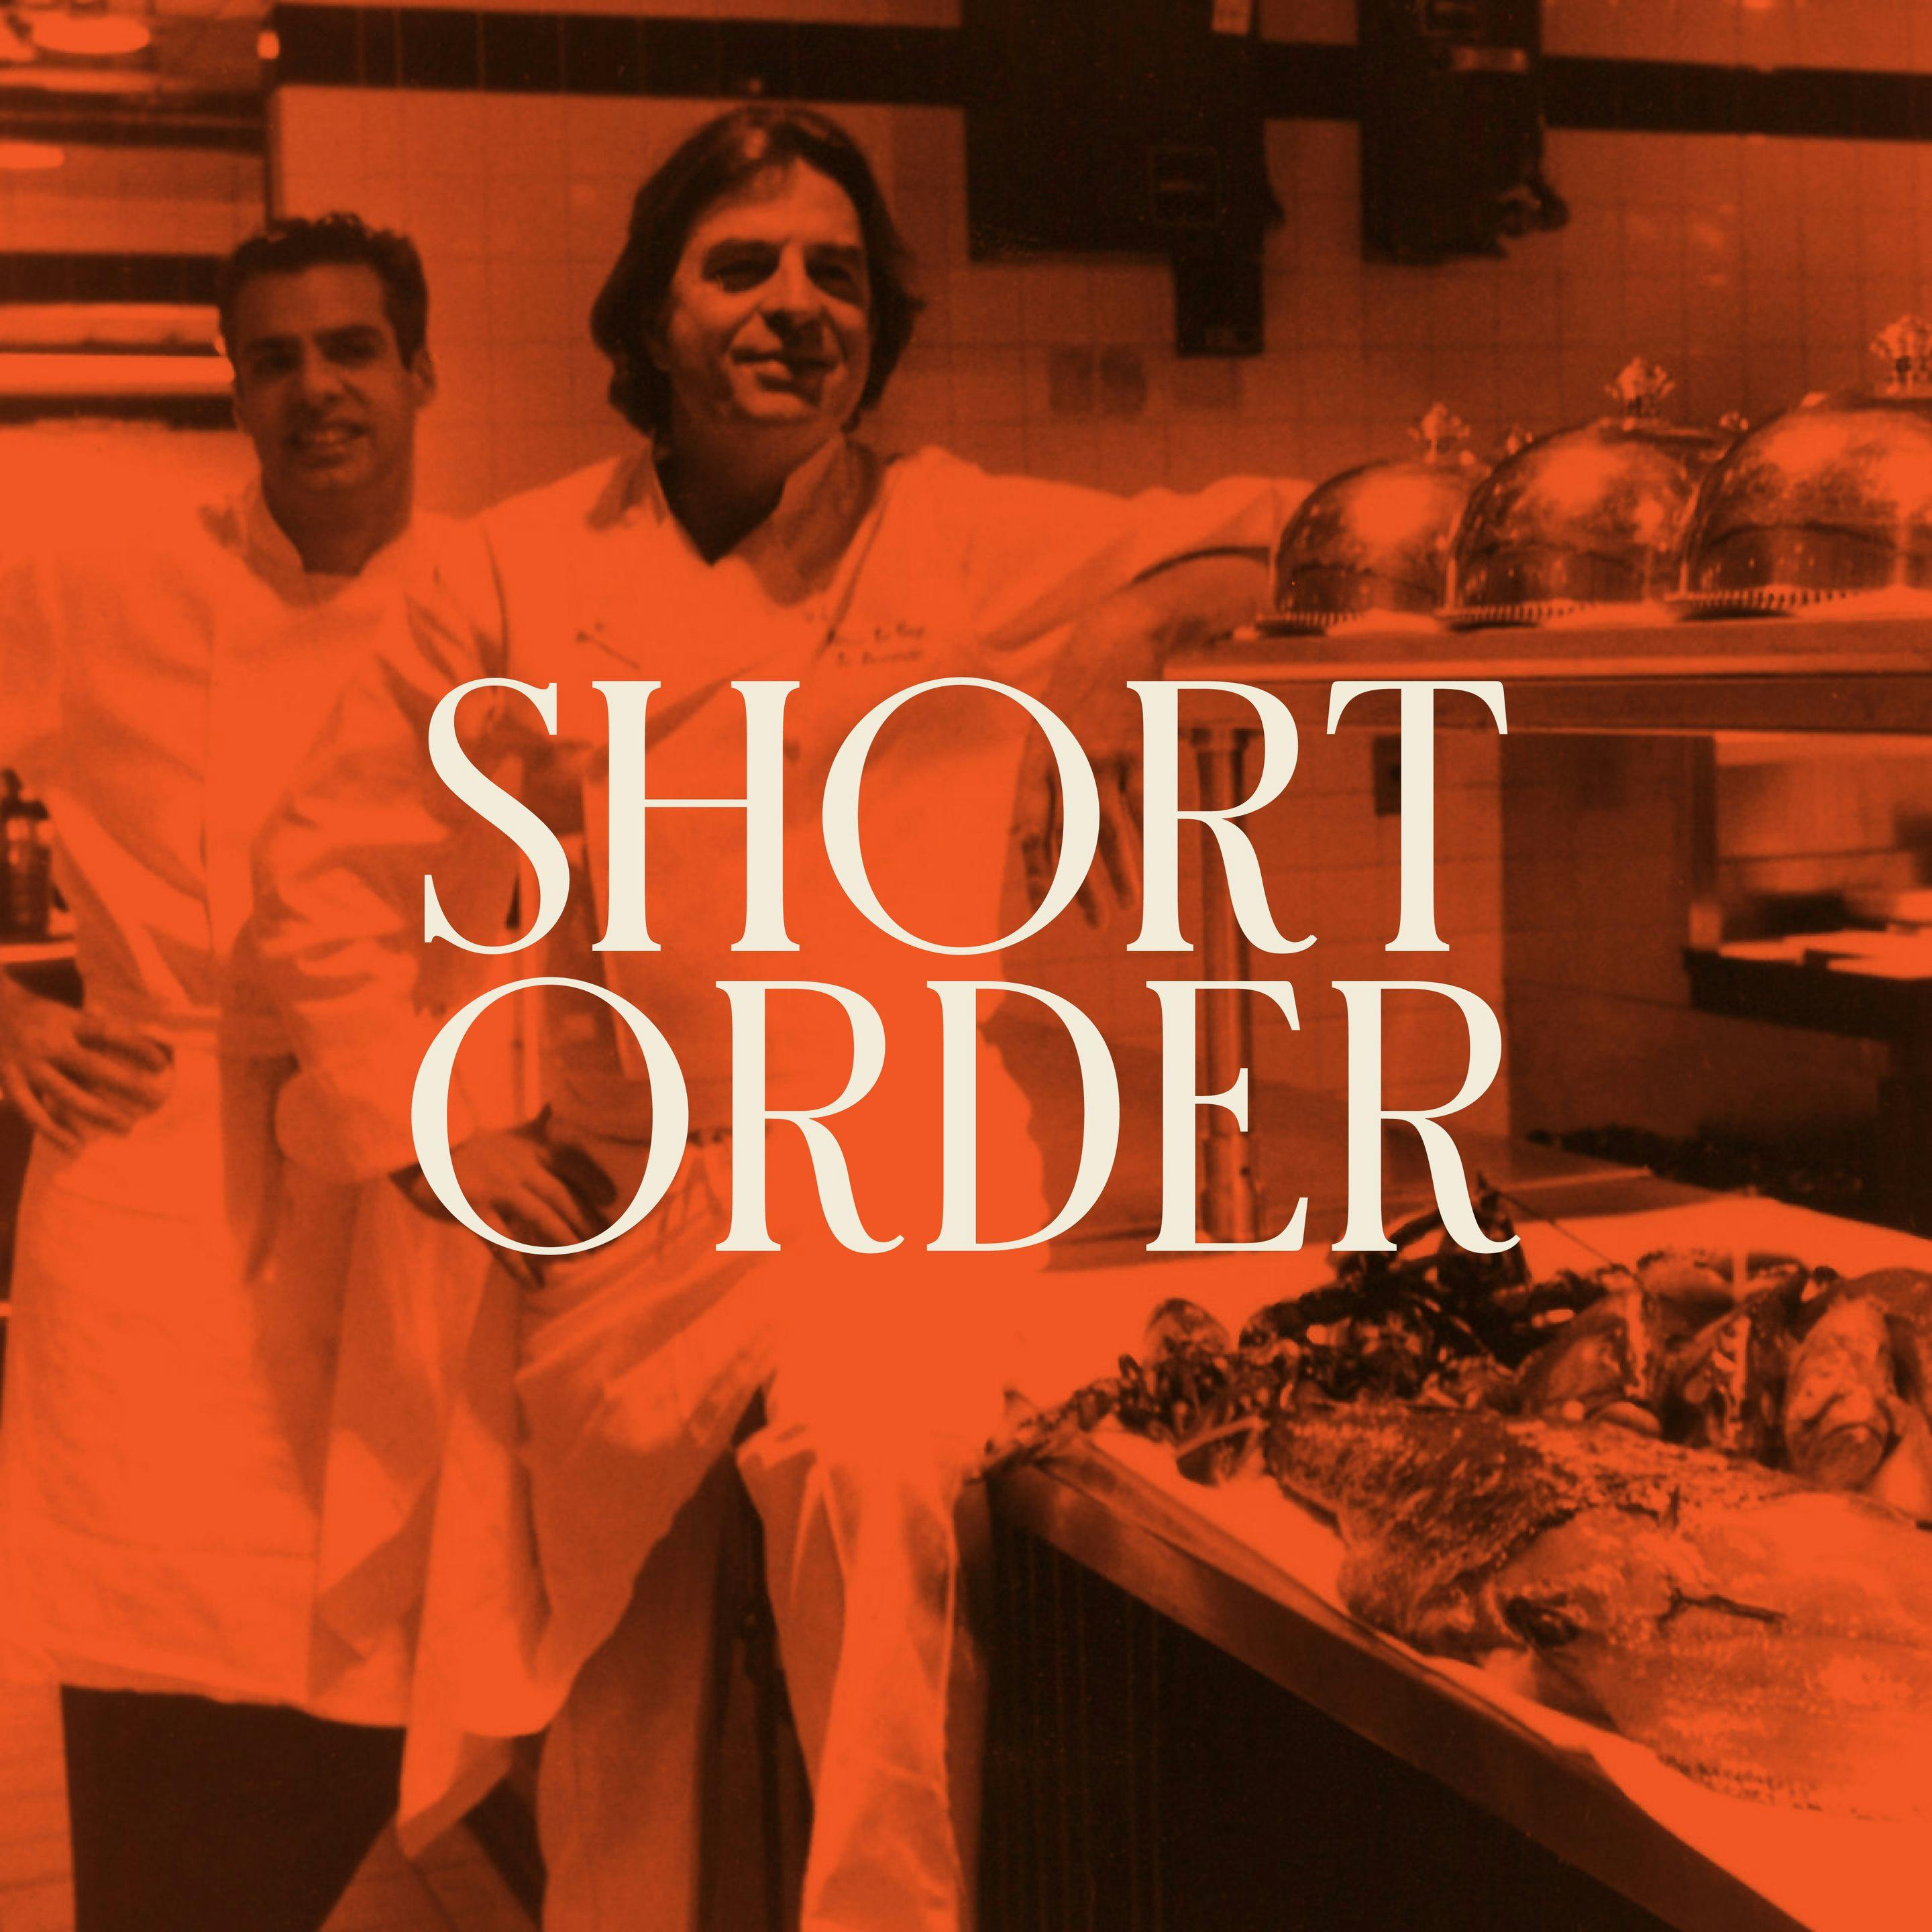 Image from Short Order